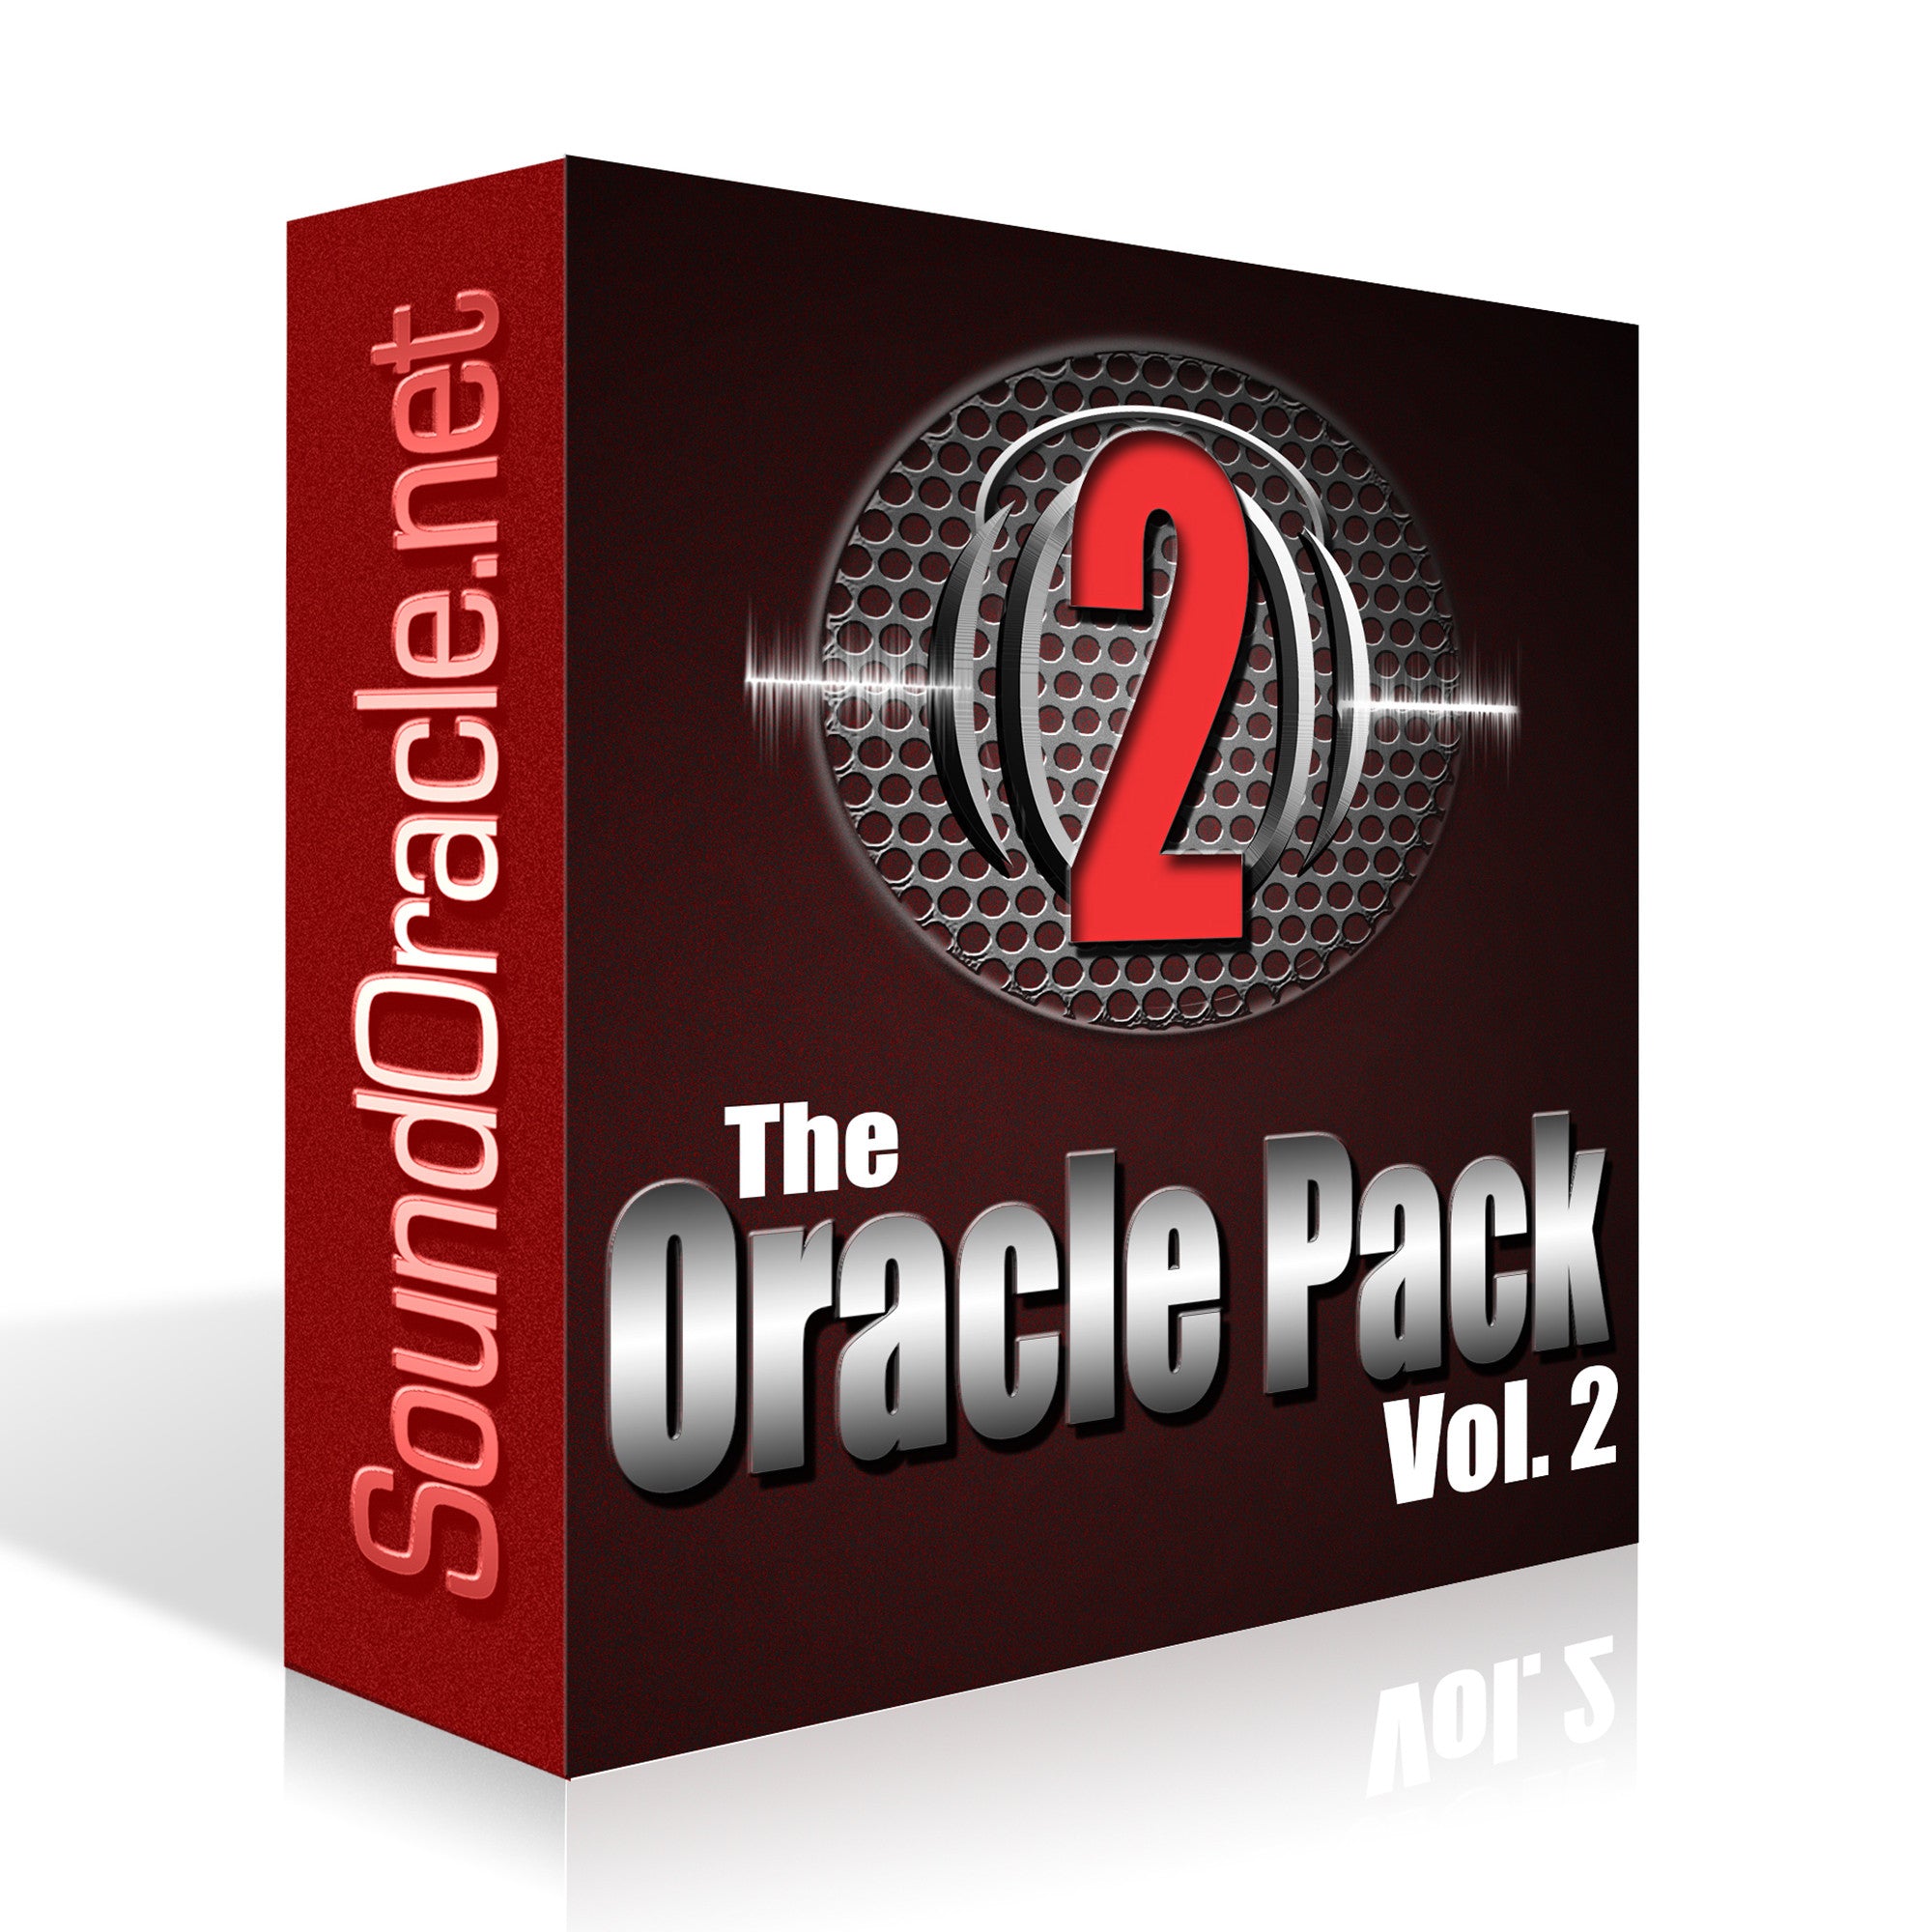 The Oracle Pack Vol 2 Review by Boomandbap.com